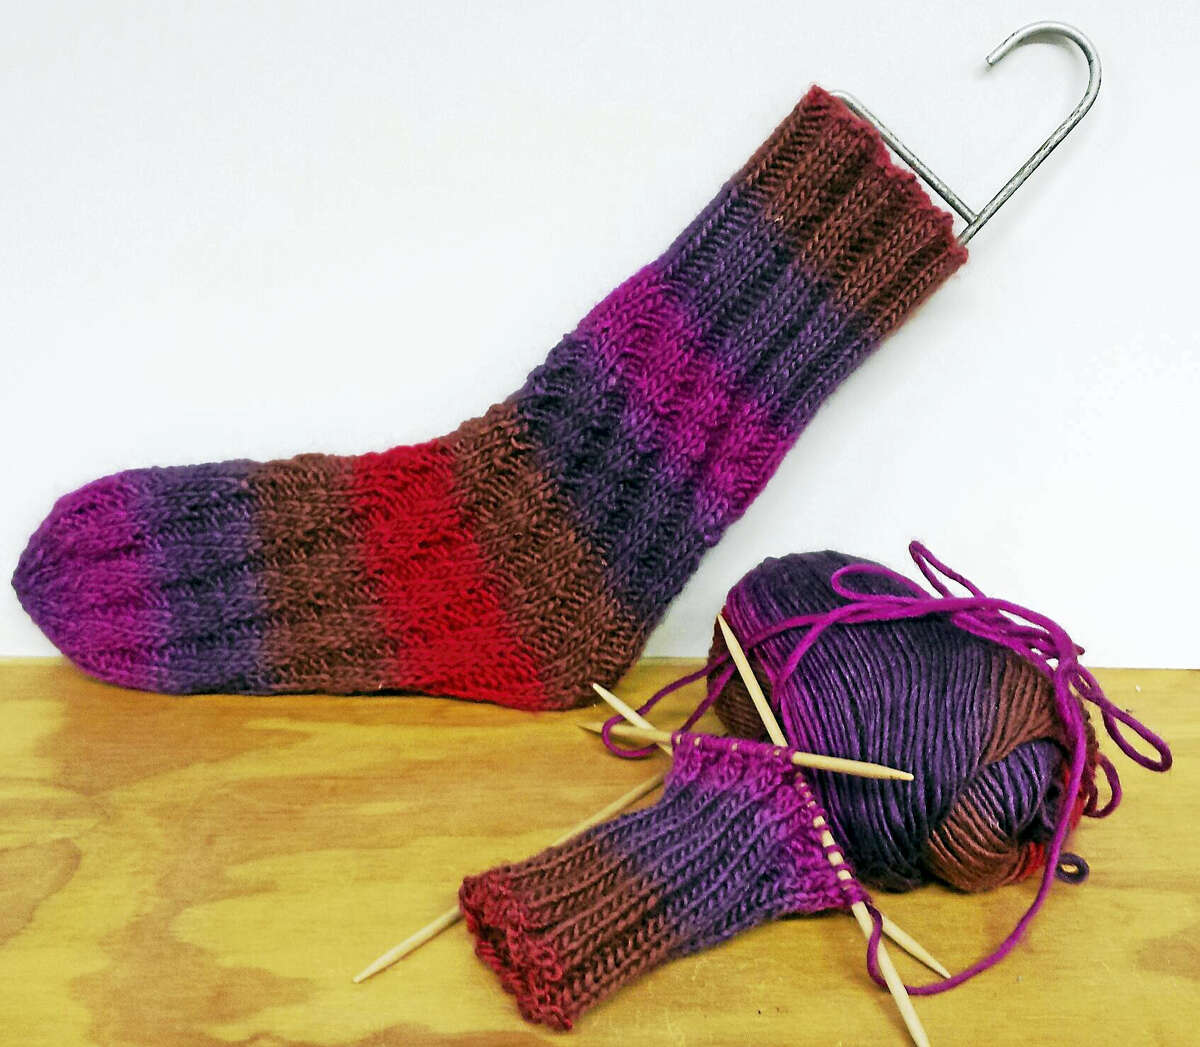 Photo by Ginger BalchSpiral socks are easy to make.